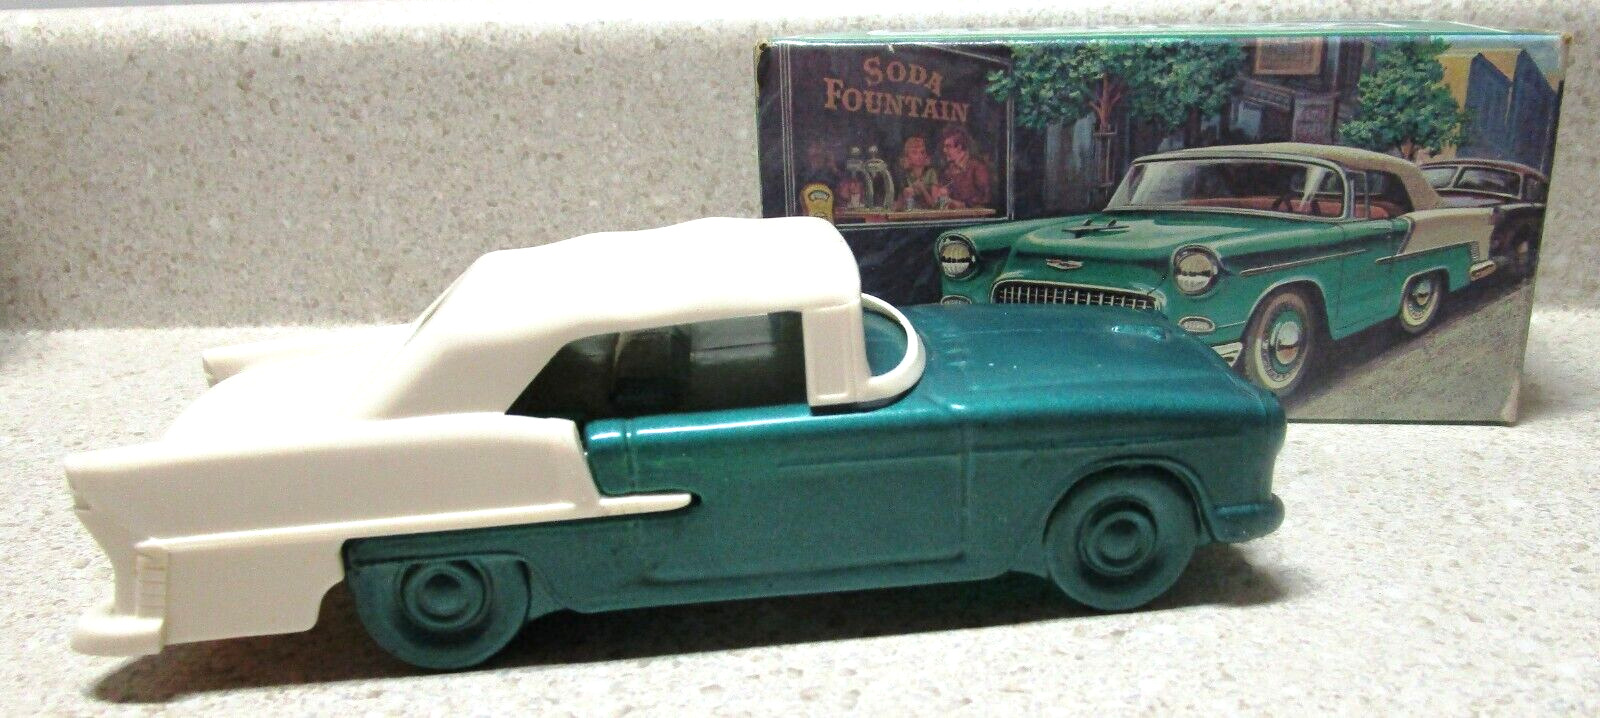 NEW AVON 1955 CHEVROLET CONVERTIBLE WITH WILD COUNTRY AFTER SHAVE